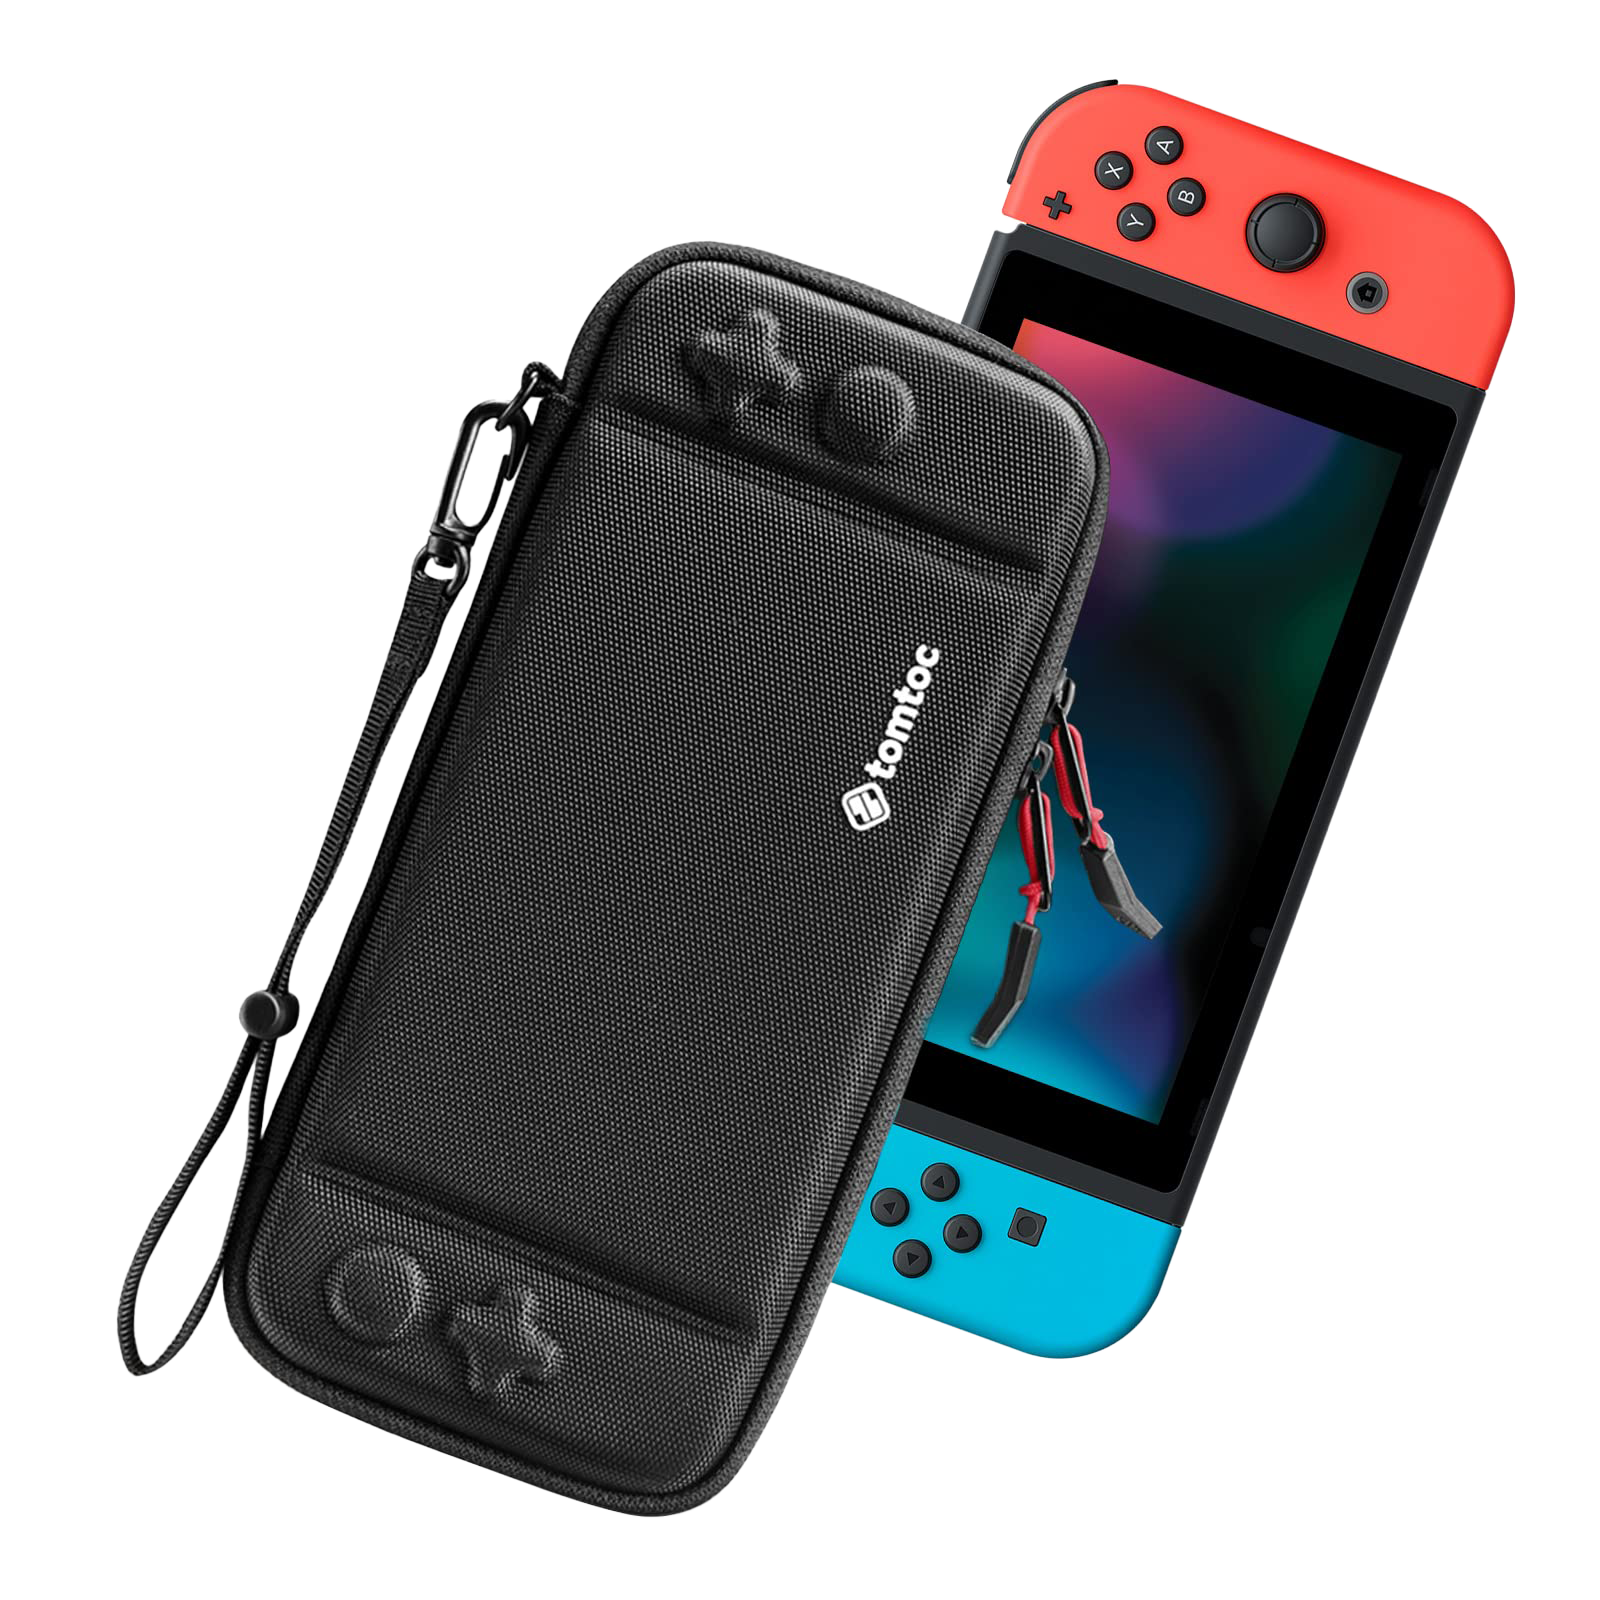 tomtoc Slim Carrying Case for Nintendo Switch / OLED Model, Protective  Switch Sleeve with 10 Game Cartridges, Hard Portable Travel Carry Case,  with